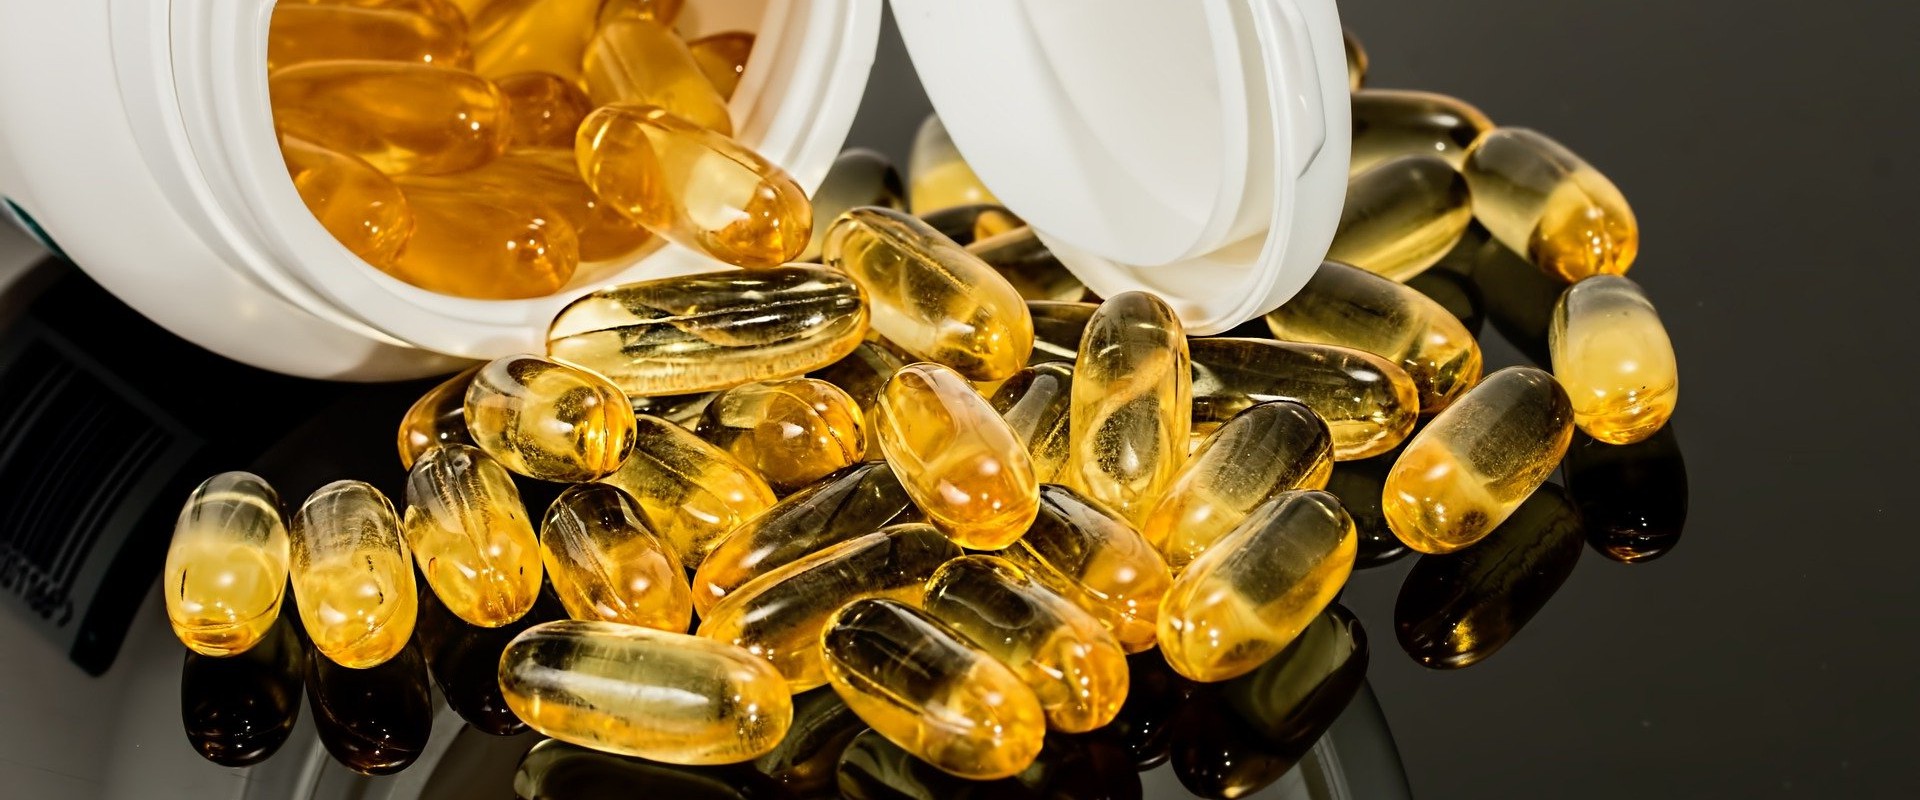 What are 3 disadvantages of dietary supplements?